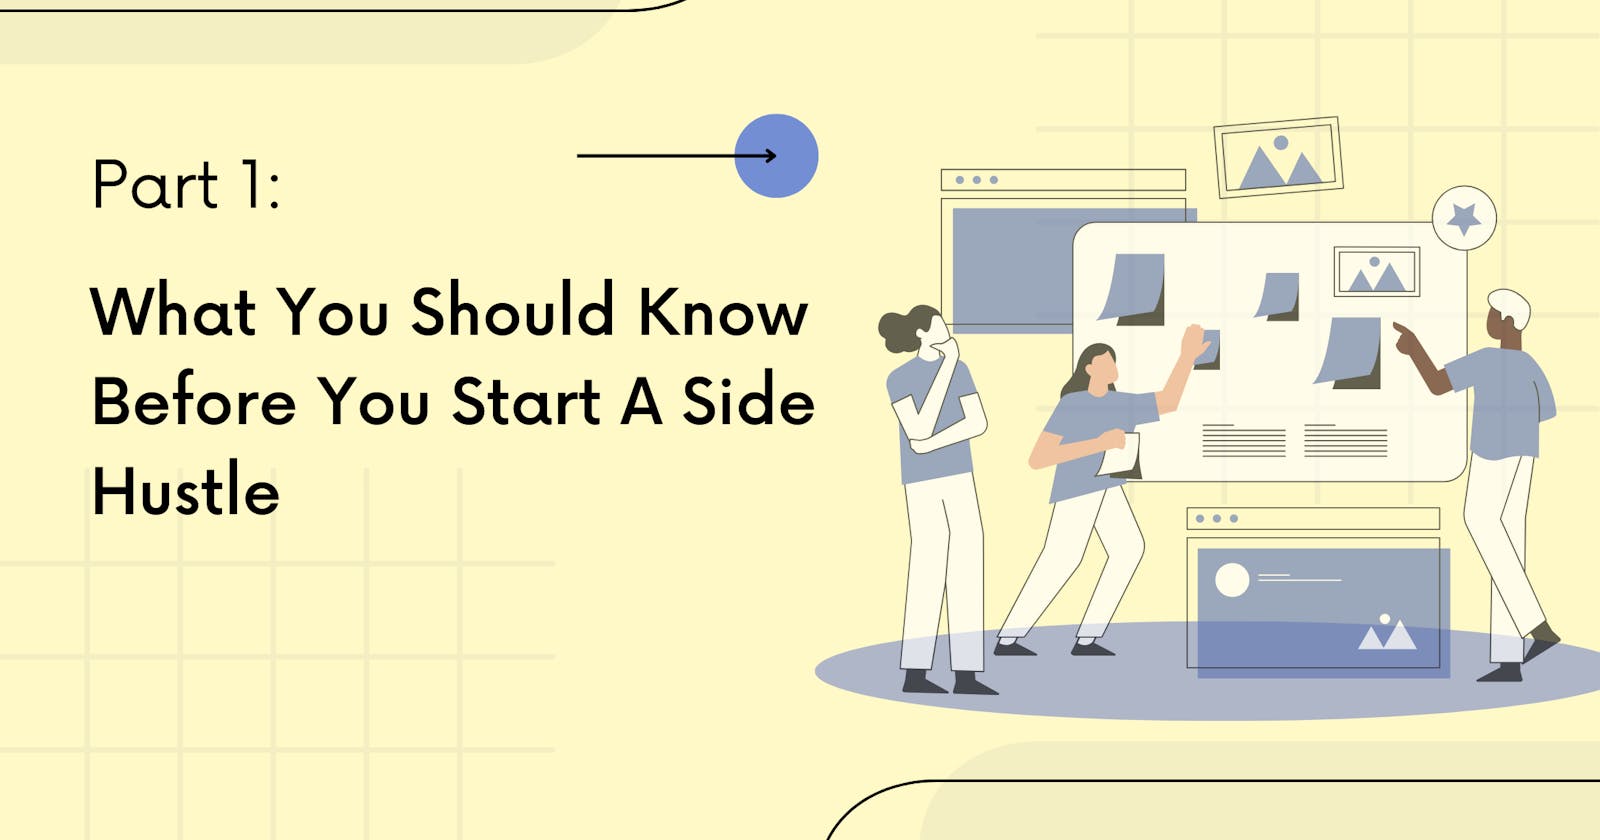 What You Should Know Before You Start A Side Hustle